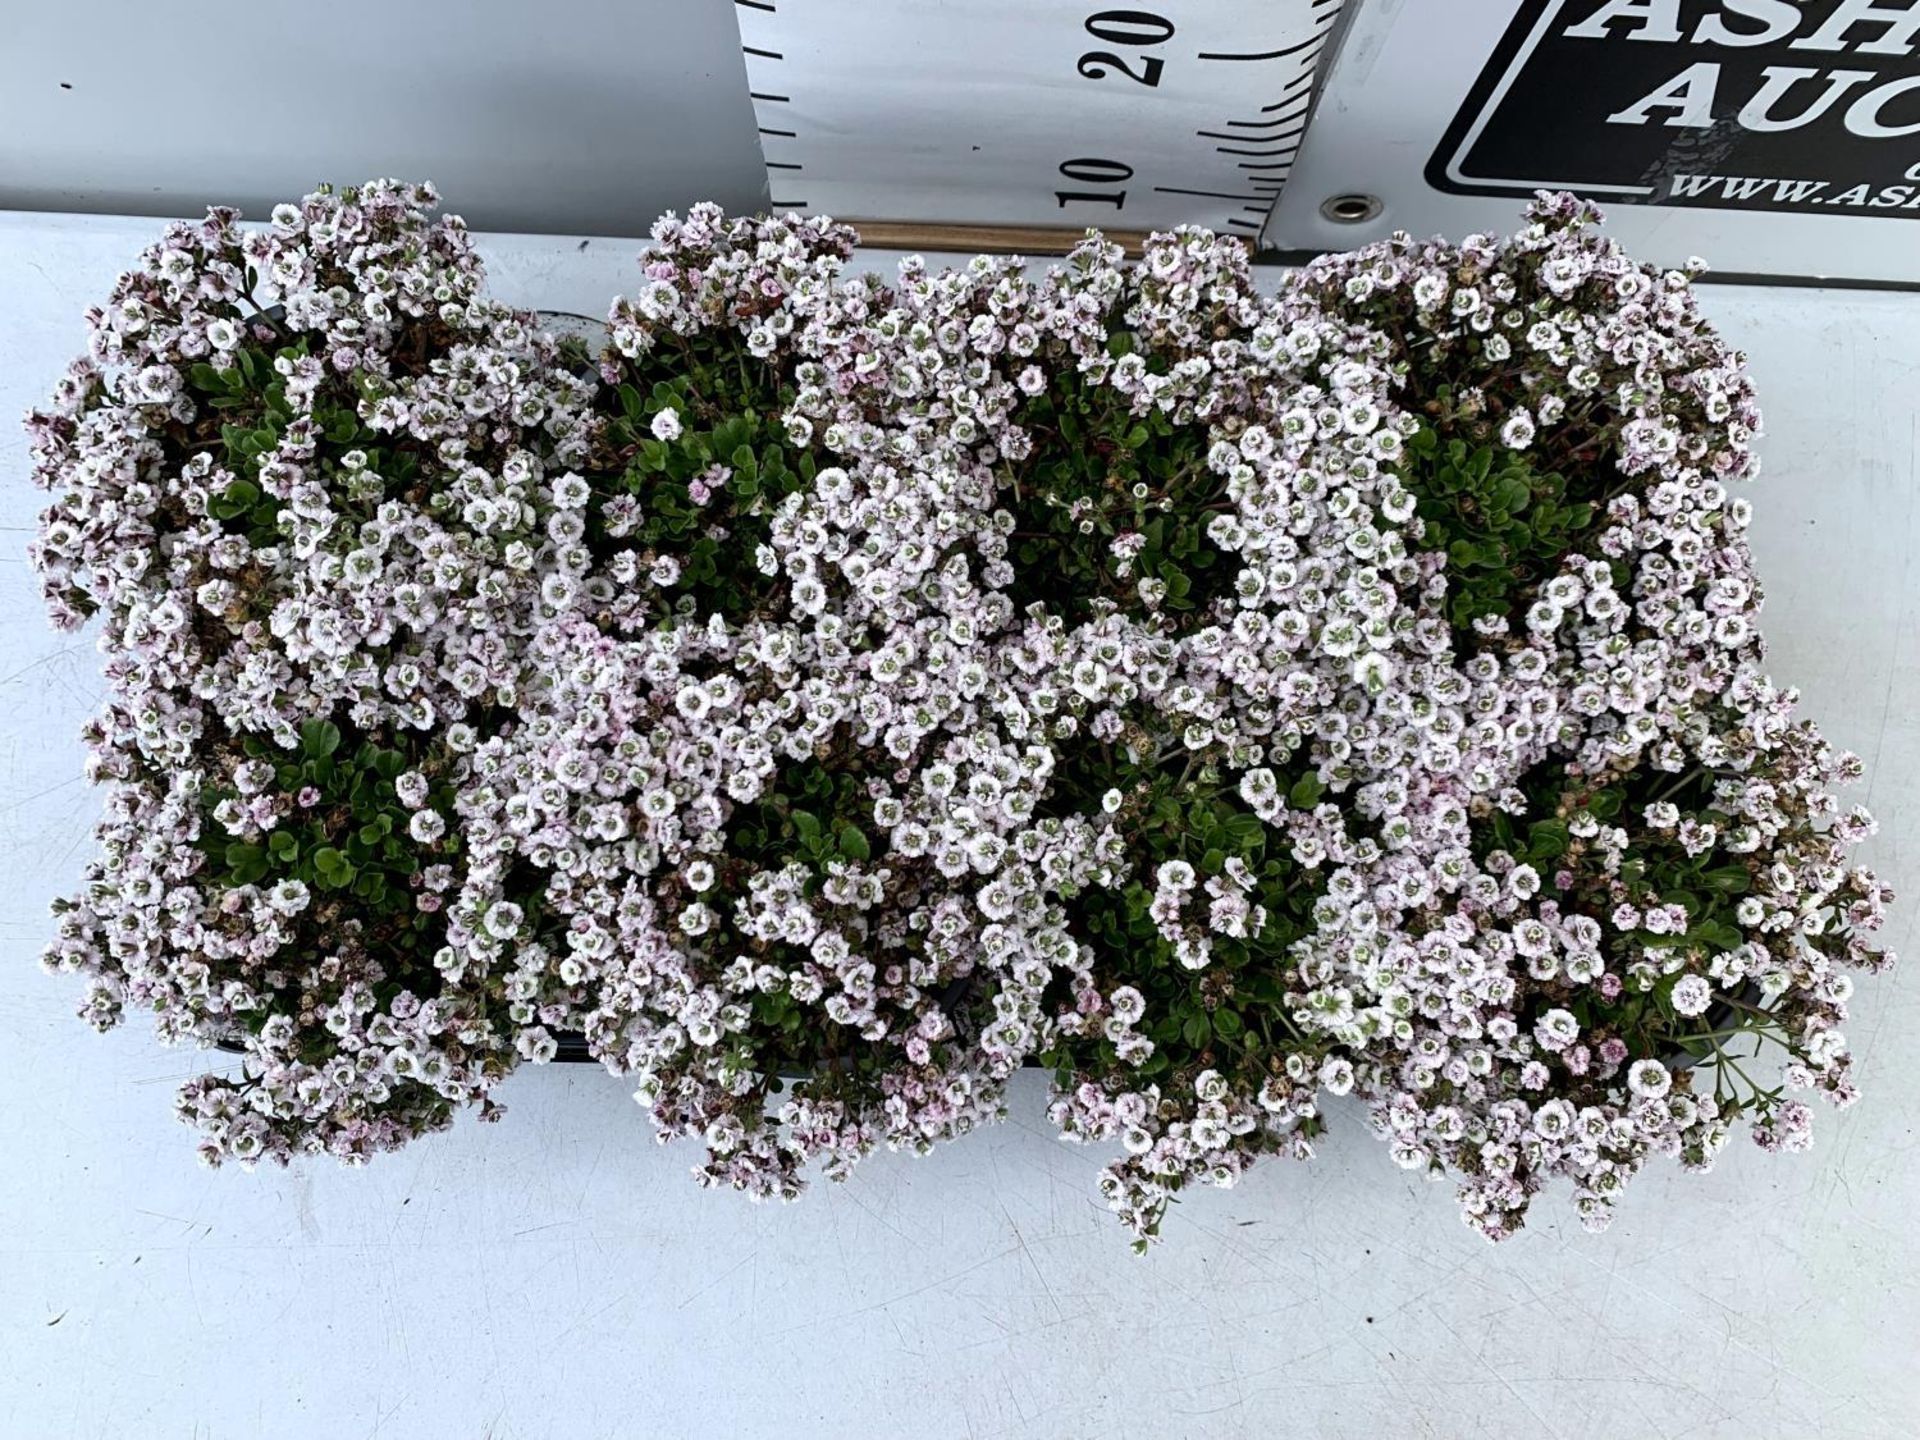 EIGHT GYPSOPHILA CERASTIOIDES PLENA WHITE IN 1 LTR POTS APPROX 20CM IN HEIGHT PLUS VAT TO BE SOLD - Image 4 of 8